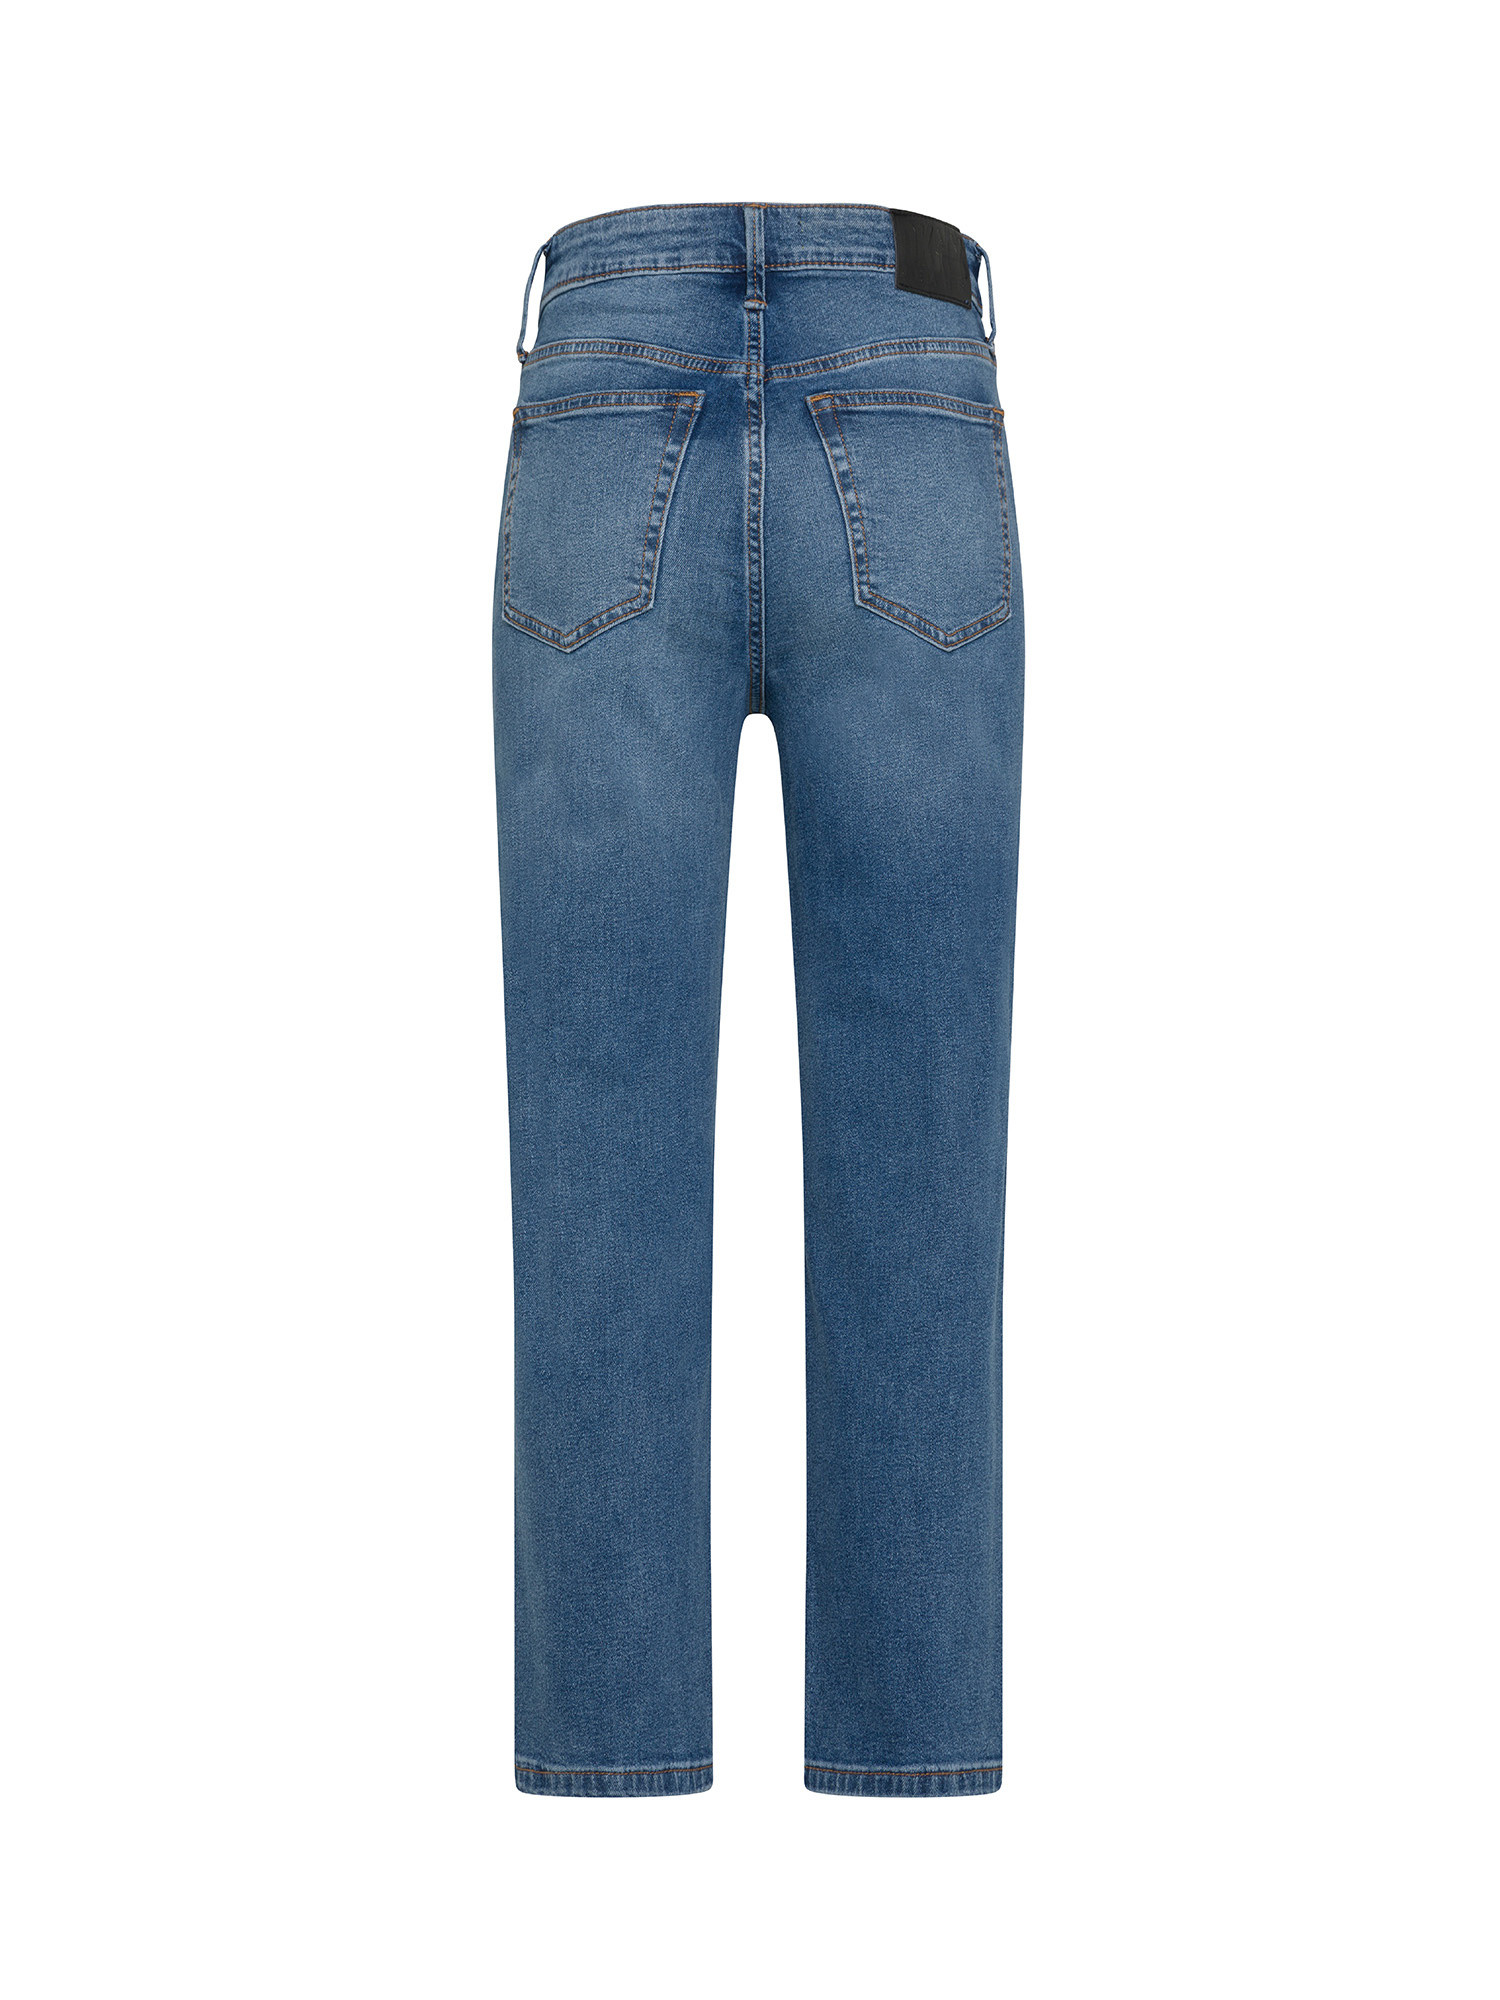 DKNY - Straight cut, slightly cropped high-waisted jeans, Denim, large image number 1